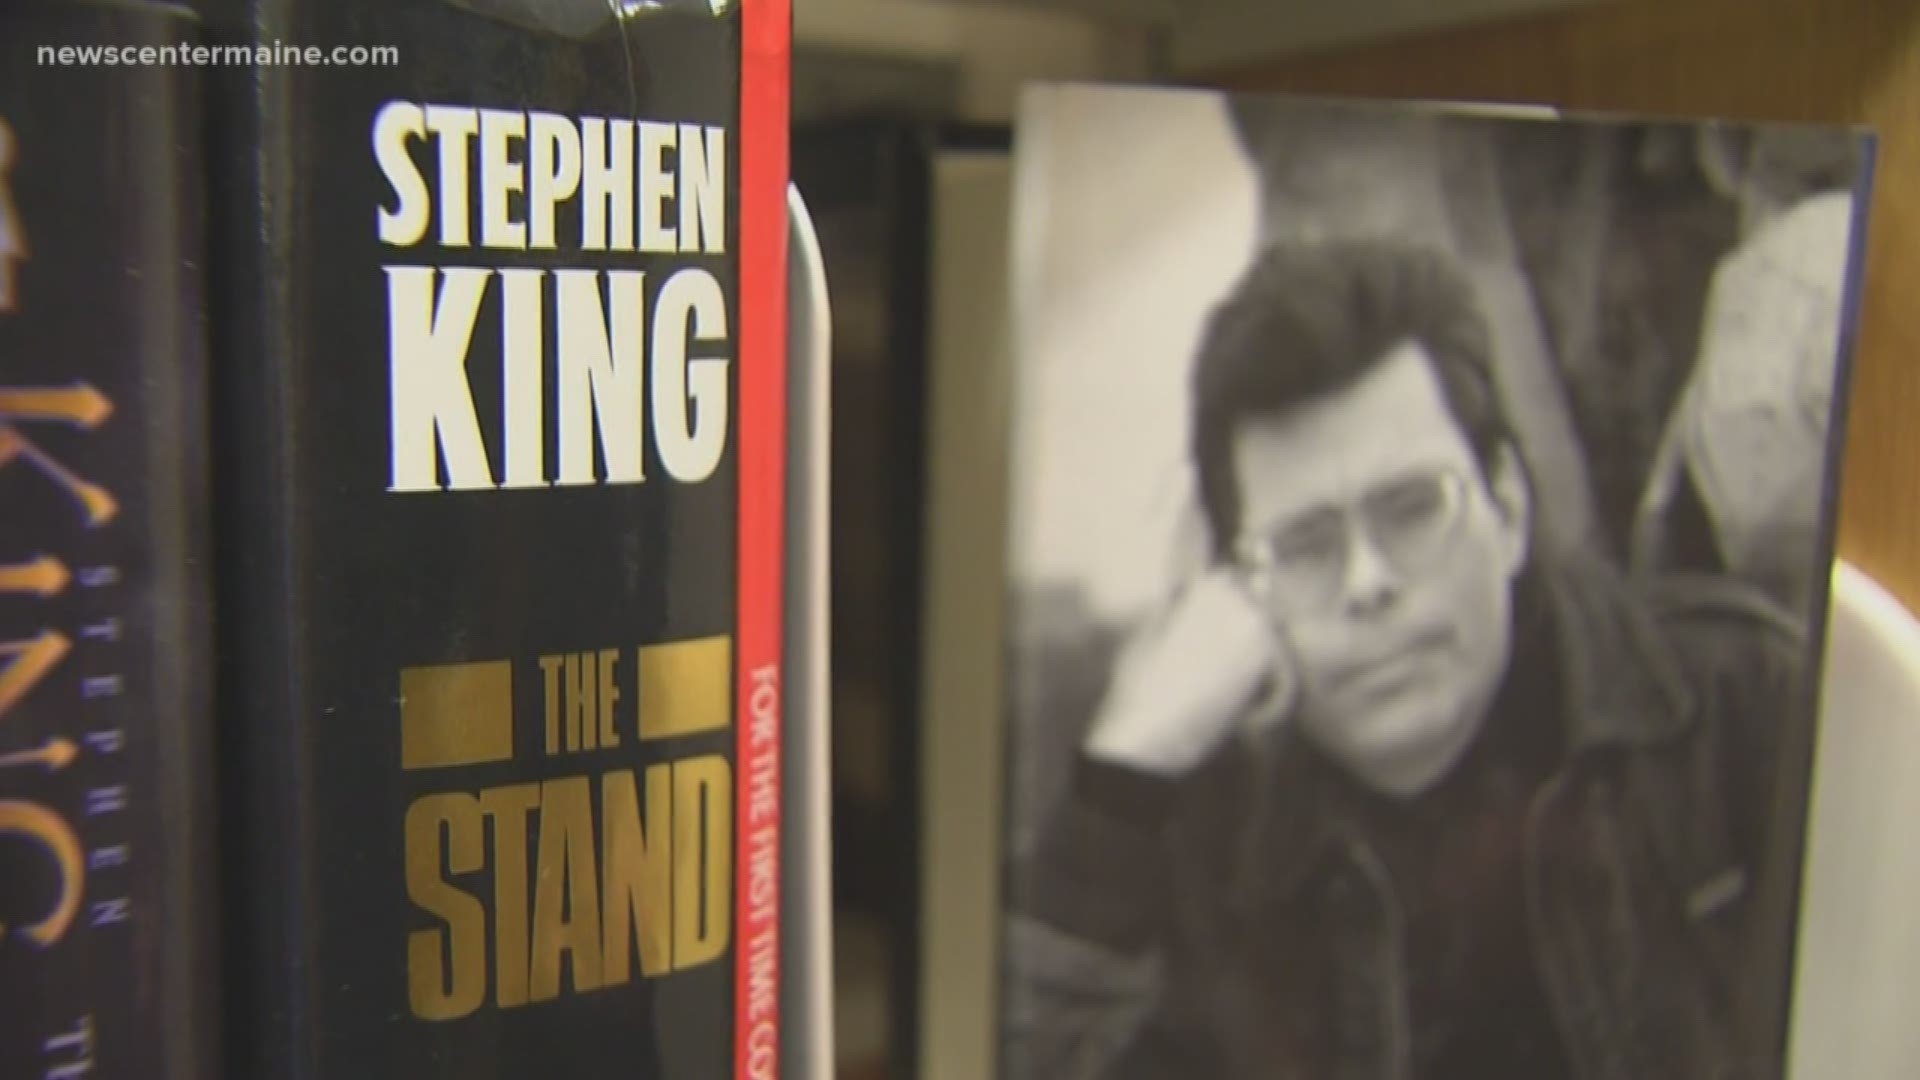 Stephen King criticized for Oscars comment